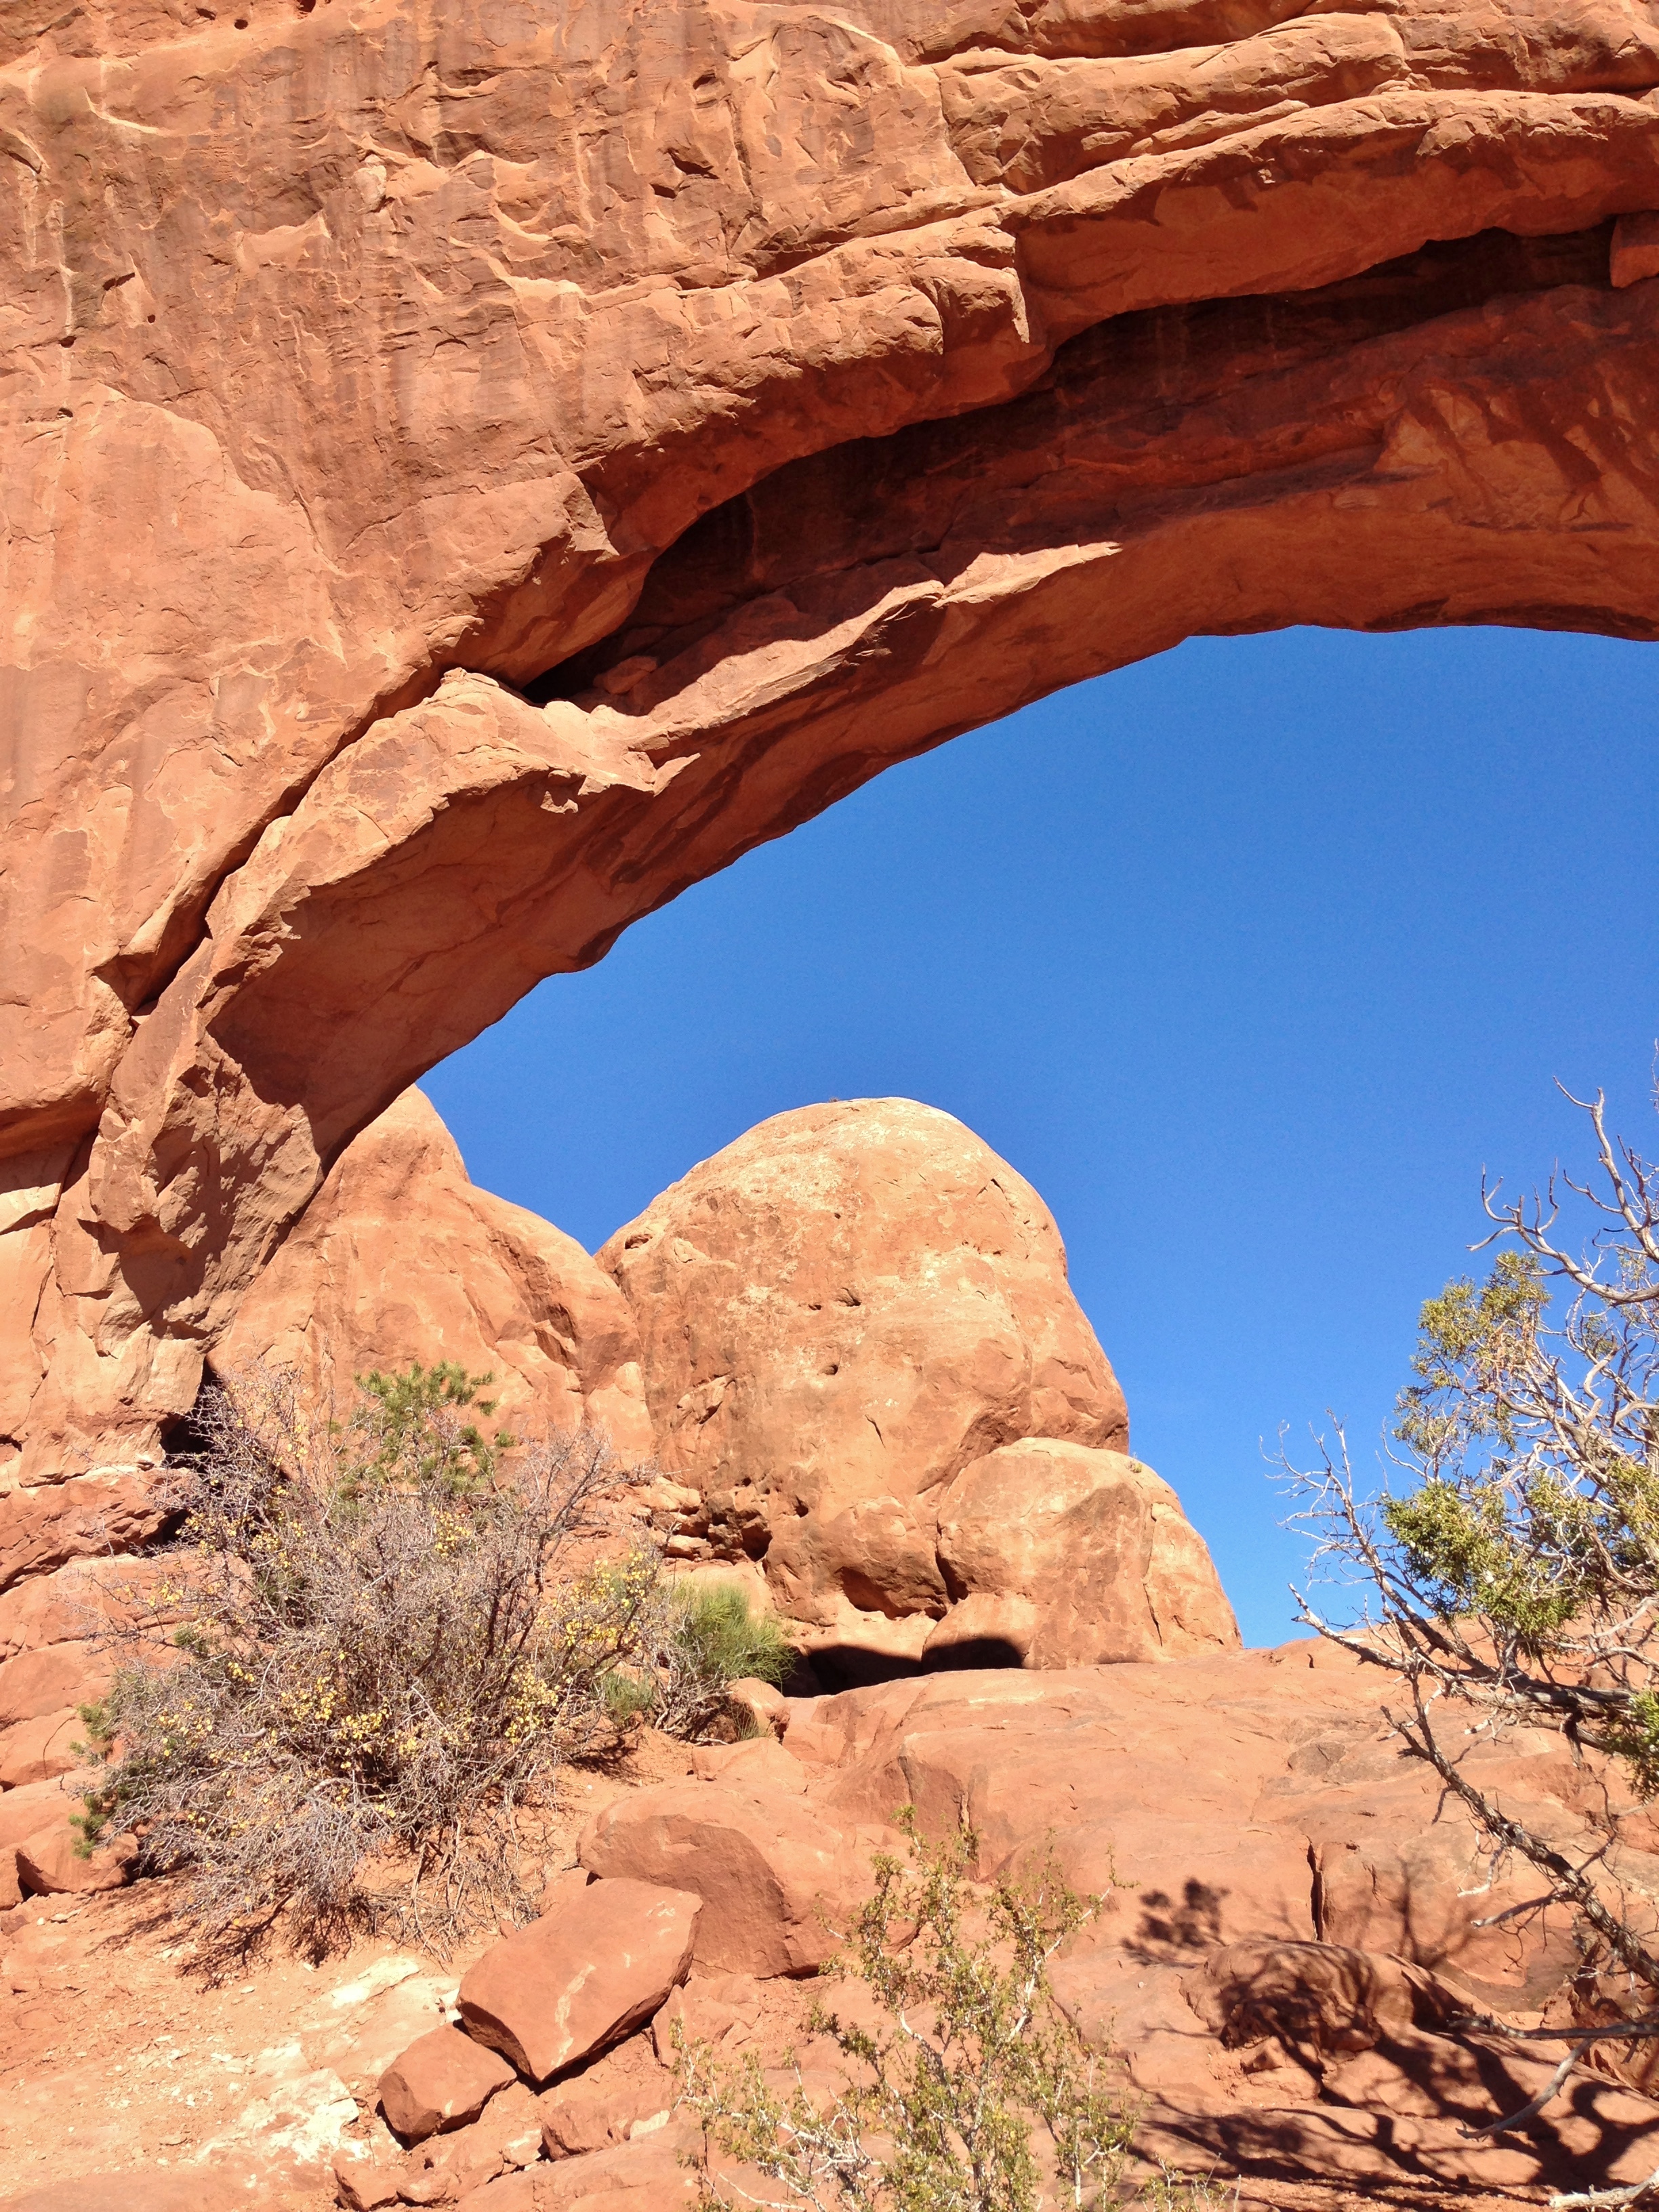 Arches National Park, Utah | A Life Exotic